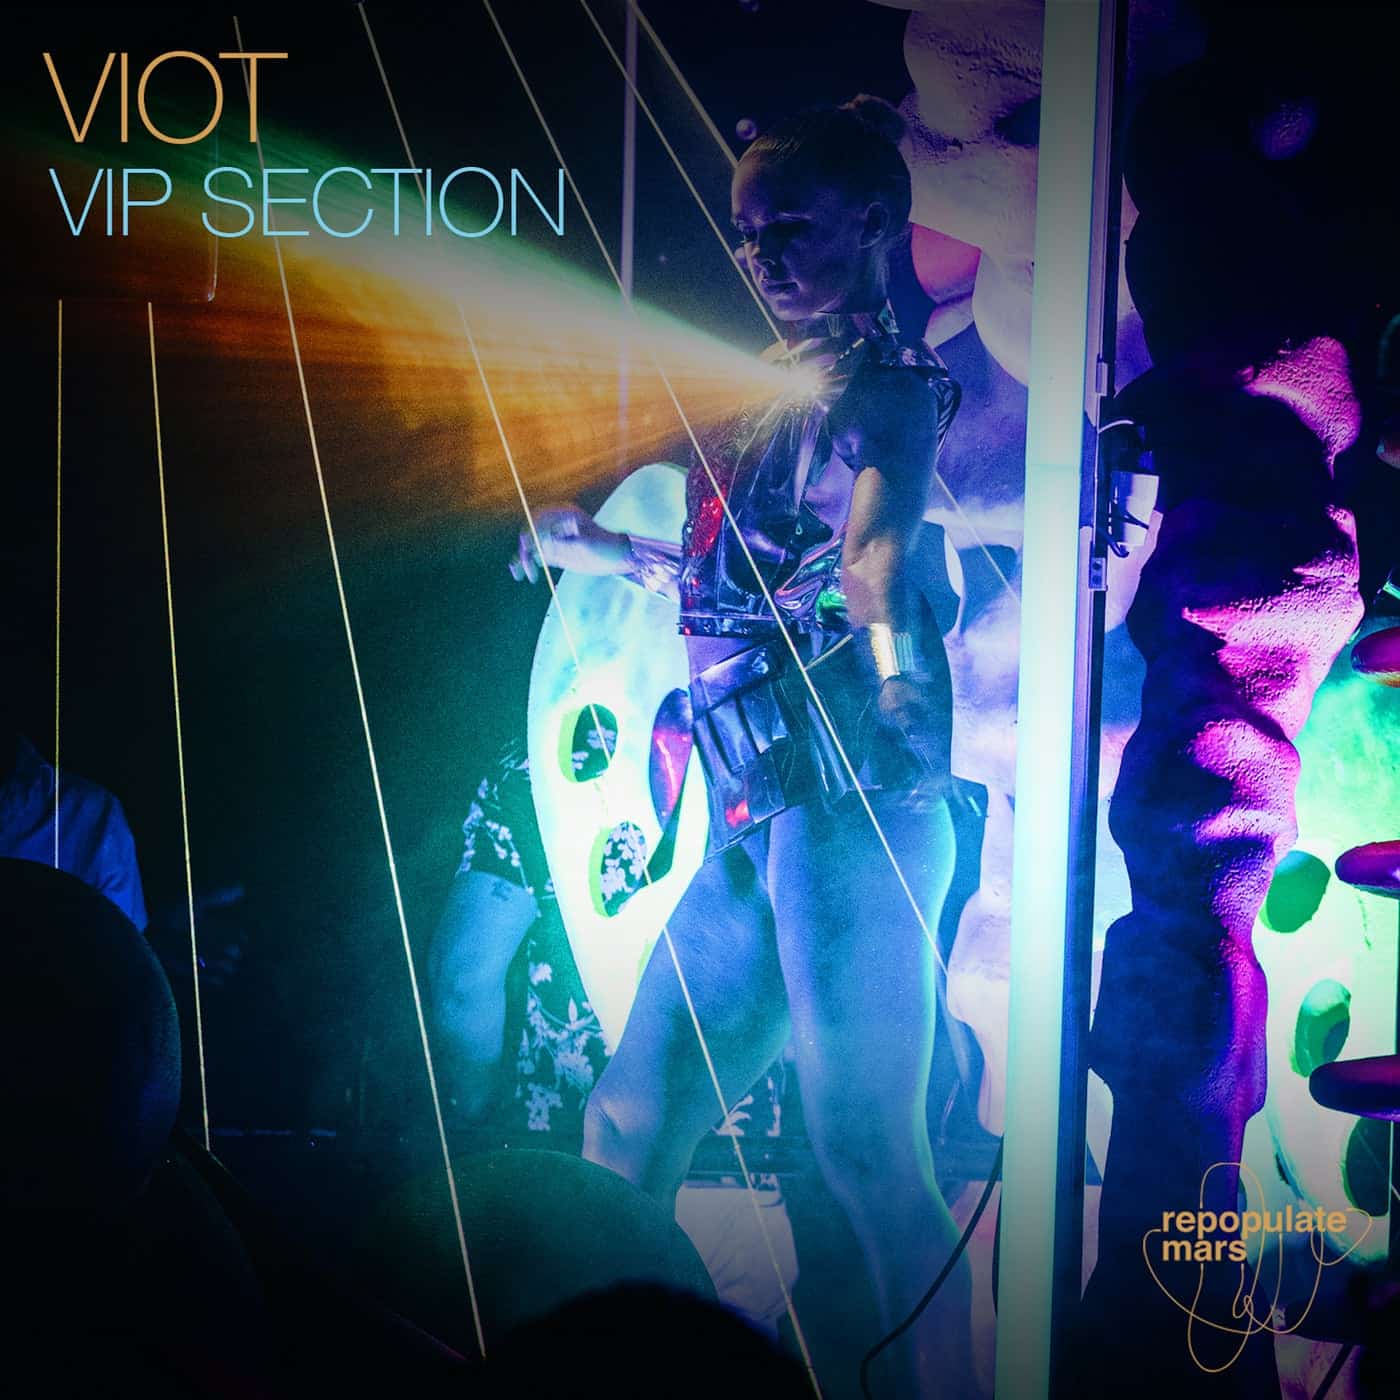 image cover: Viot - VIP Section / RPM166